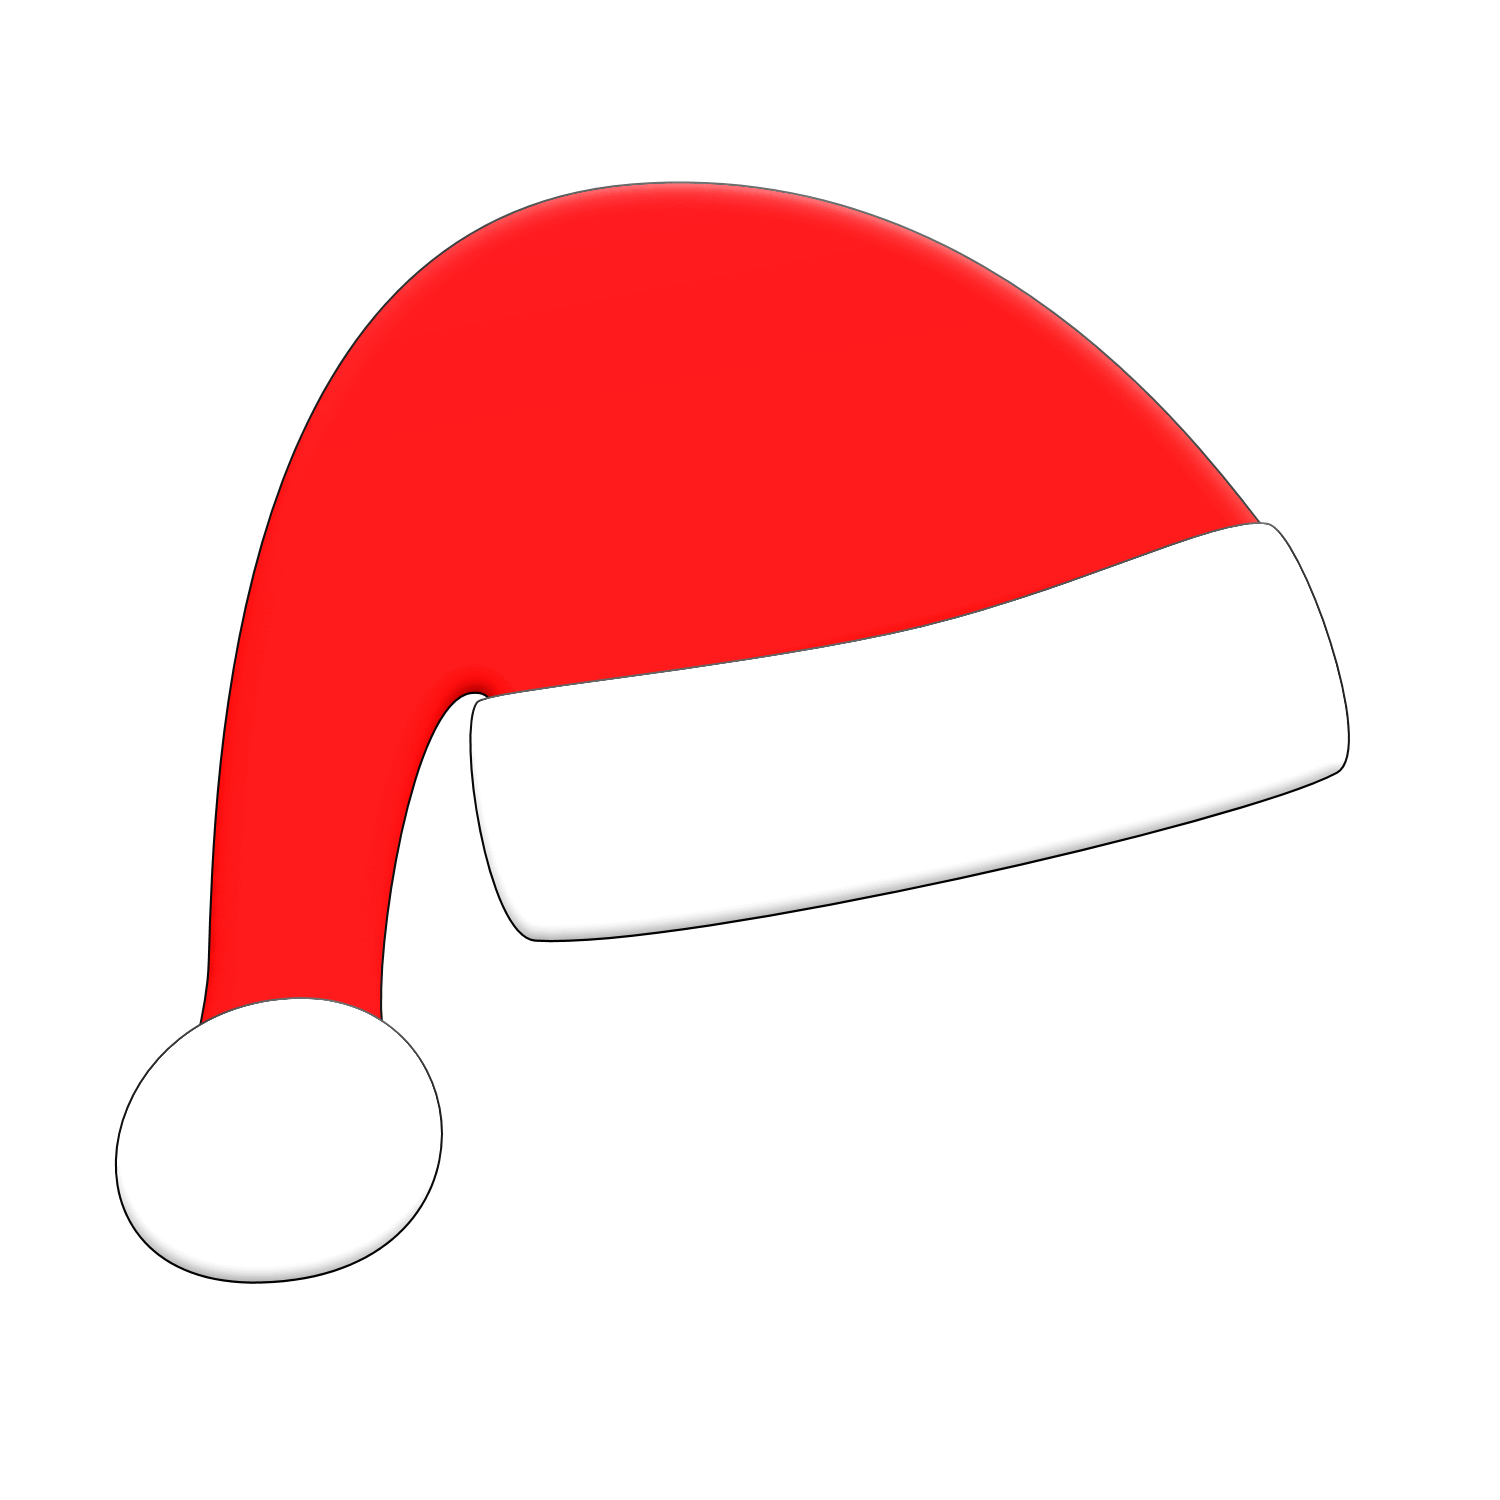 Santa hat vector free free vector for free download about clipart ...